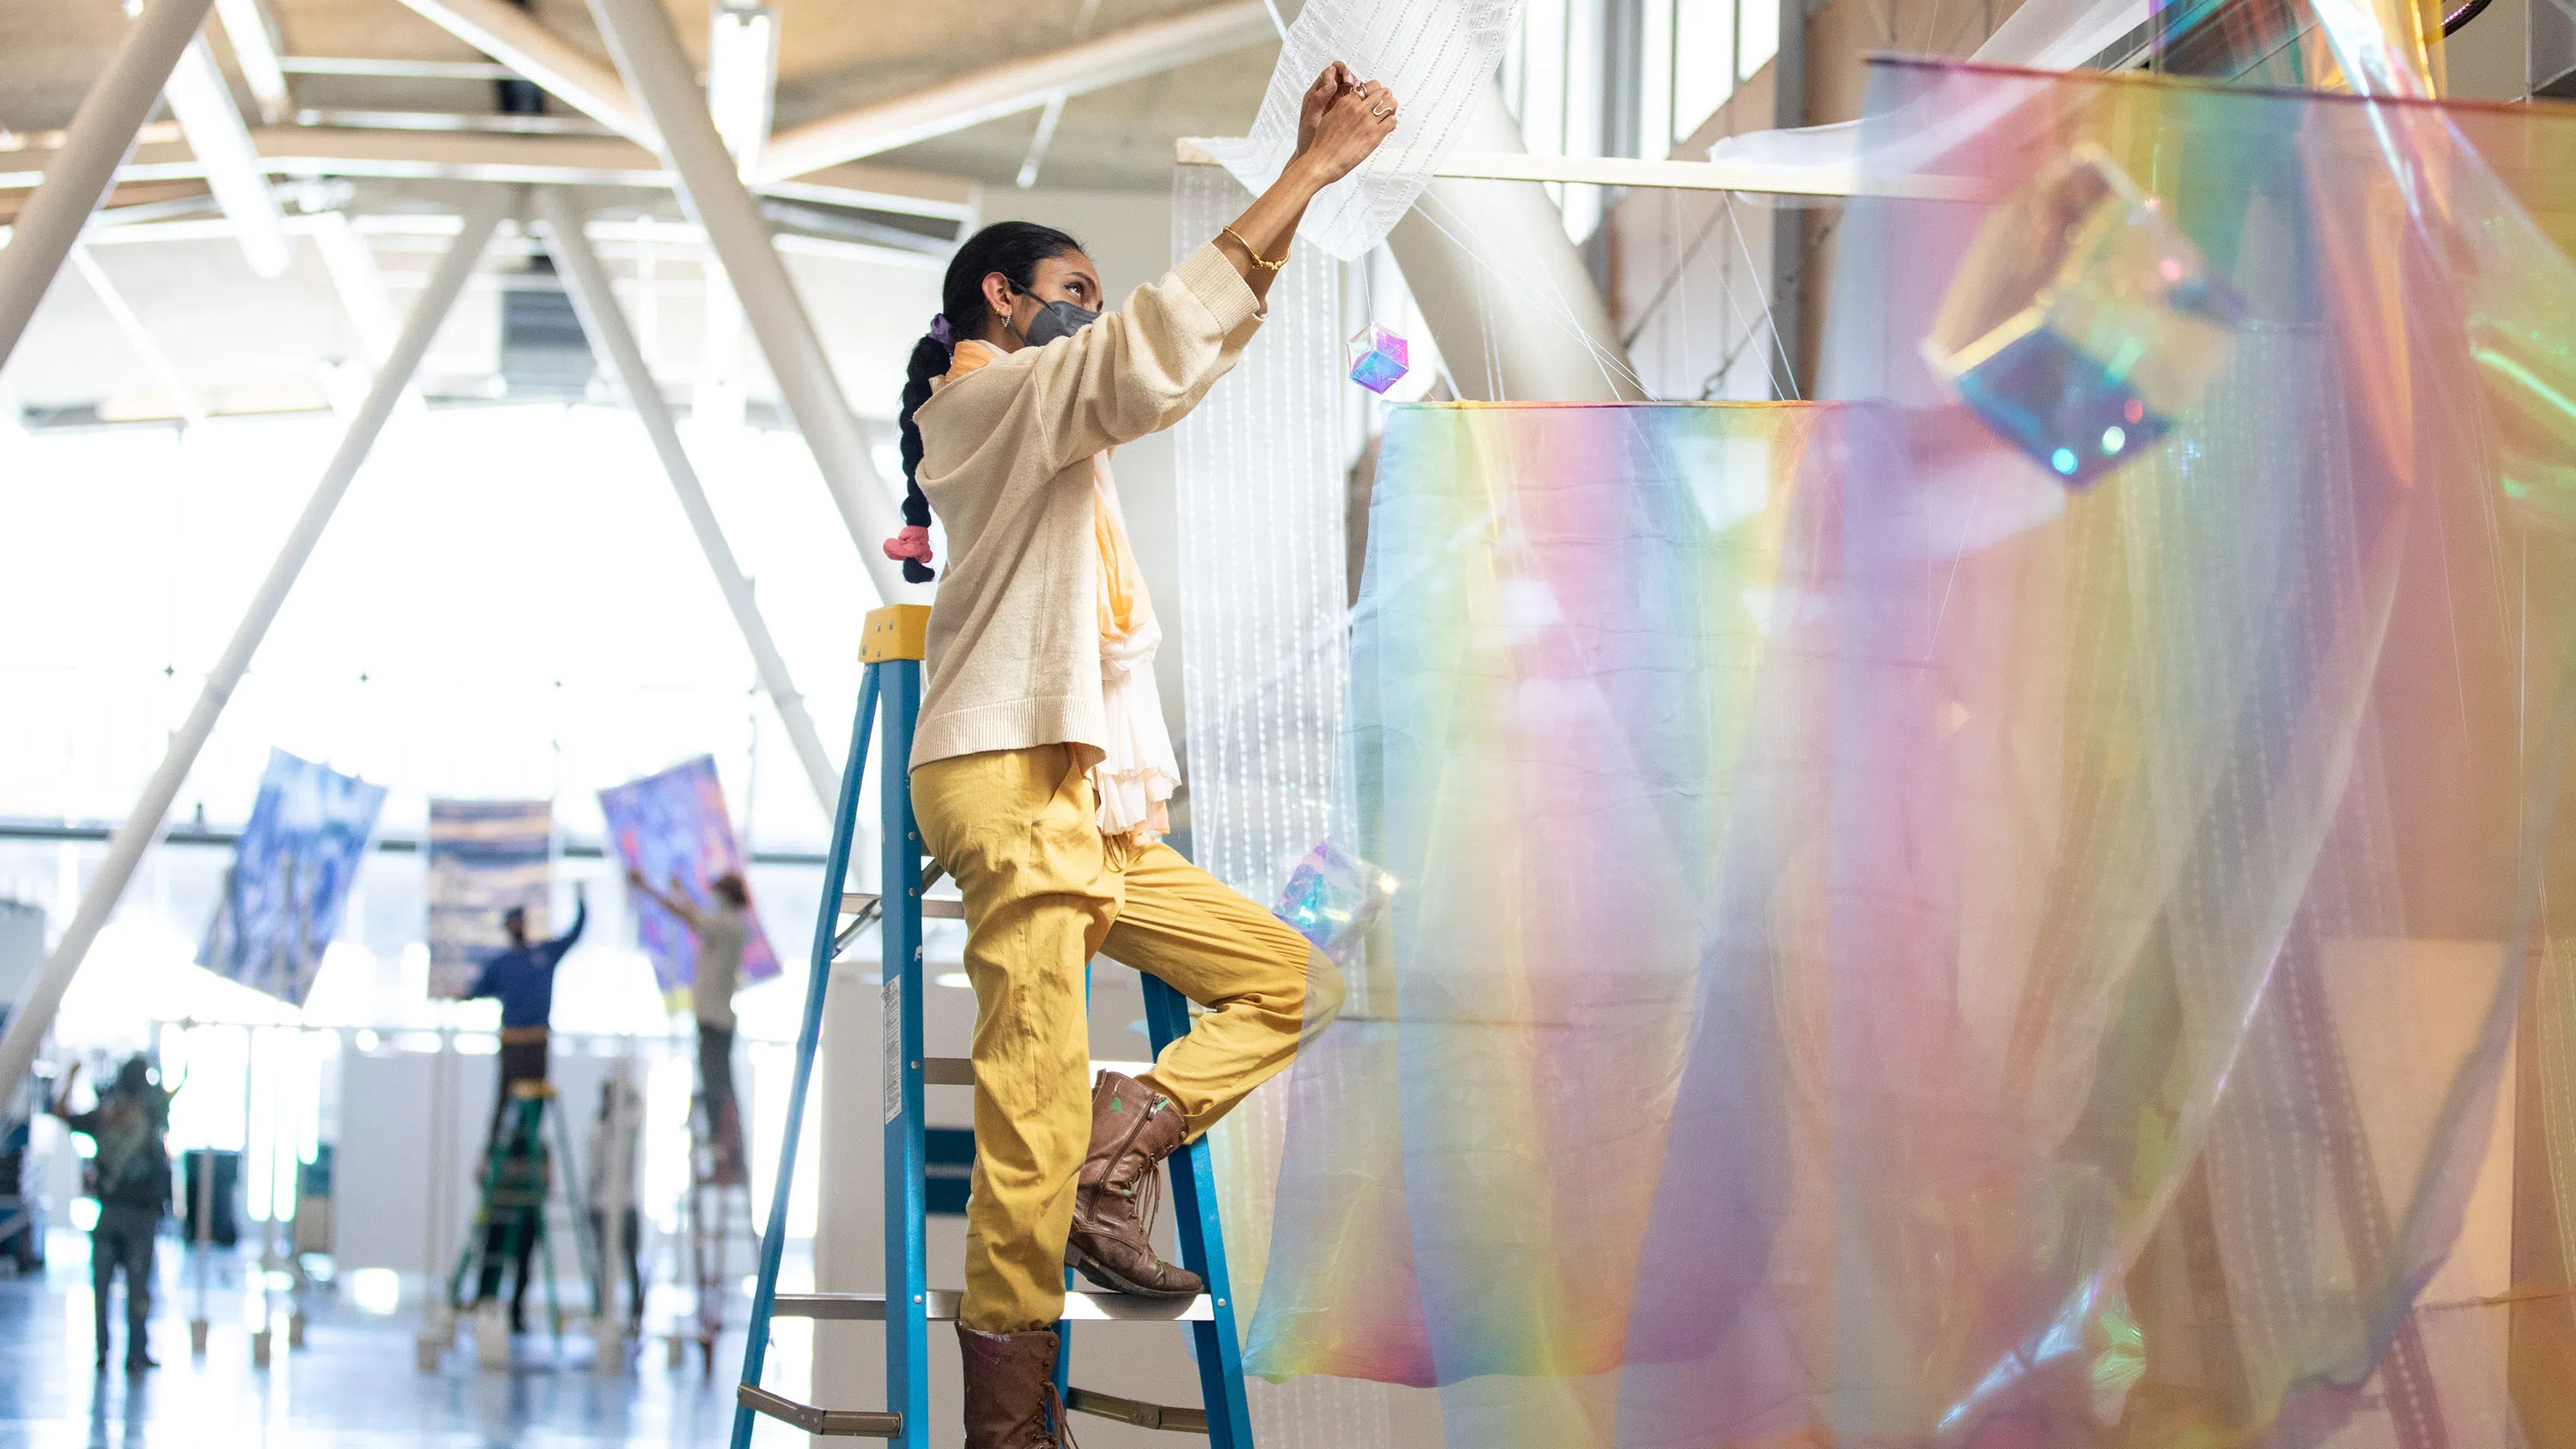 A person stands on a ladder, hanging an installation of gauzy mesh and prisms. Toward the back of the light-filled space, four people suspend large-scale photographs.